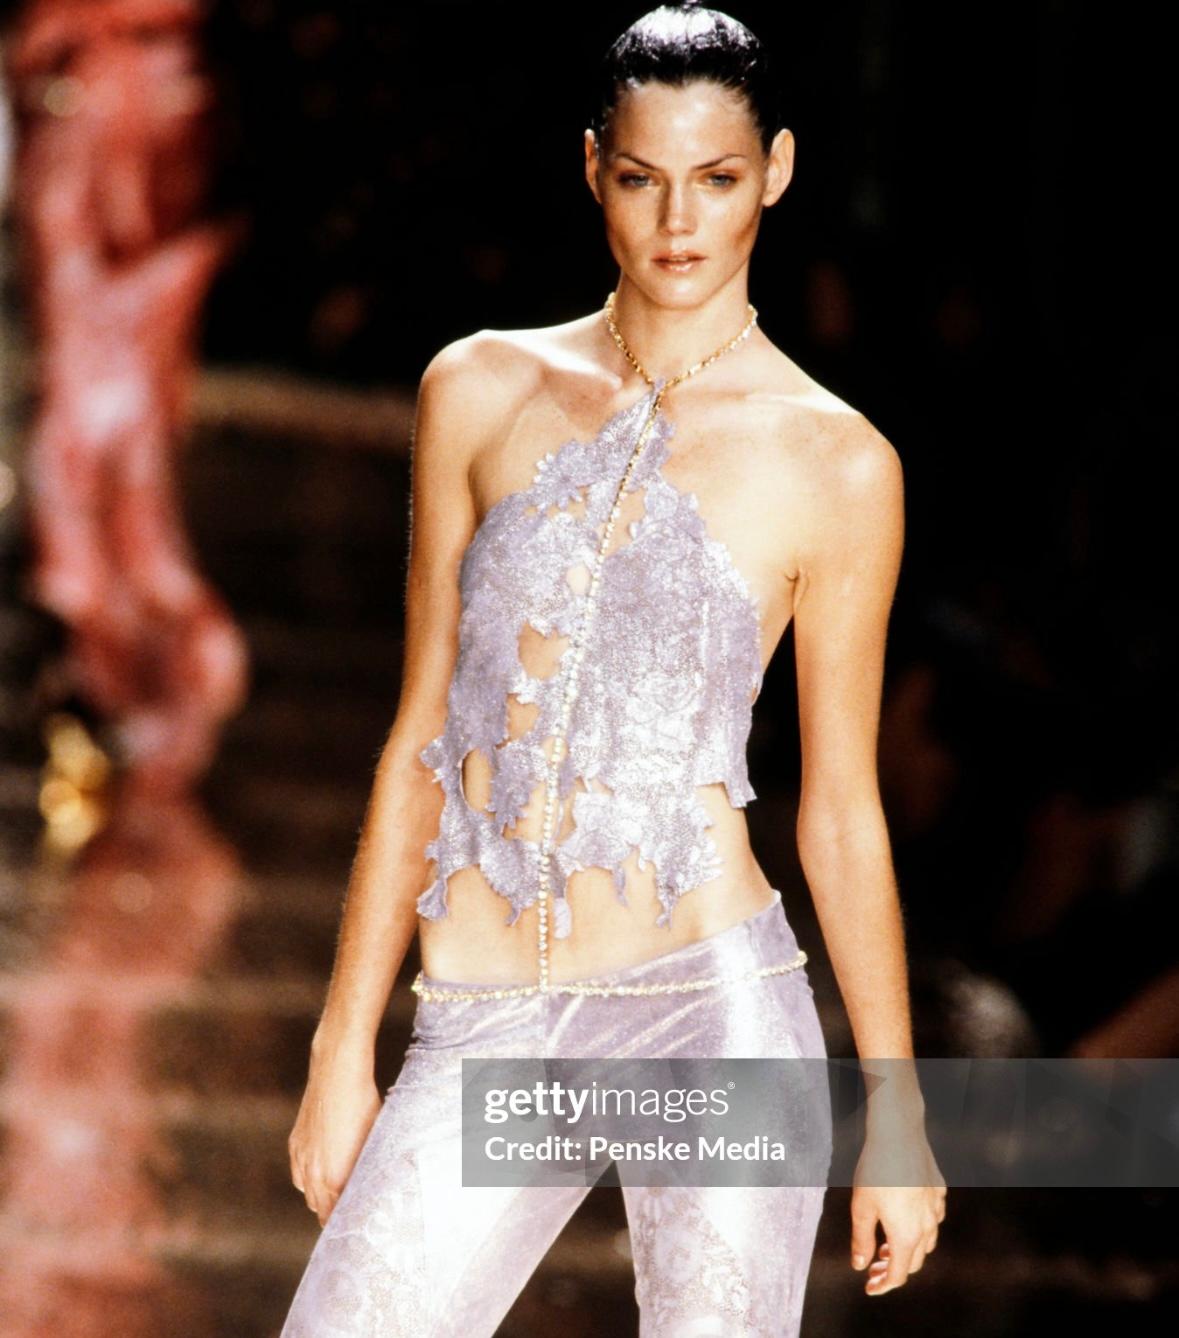 Presenting a gold-tone rhinestone accented Roberto Cavalli body chain. From the Spring/Summer 2000 collection, this costume body chain debuted on the season's runway with similar versions in several looks. This chic body chain shimmers and shines